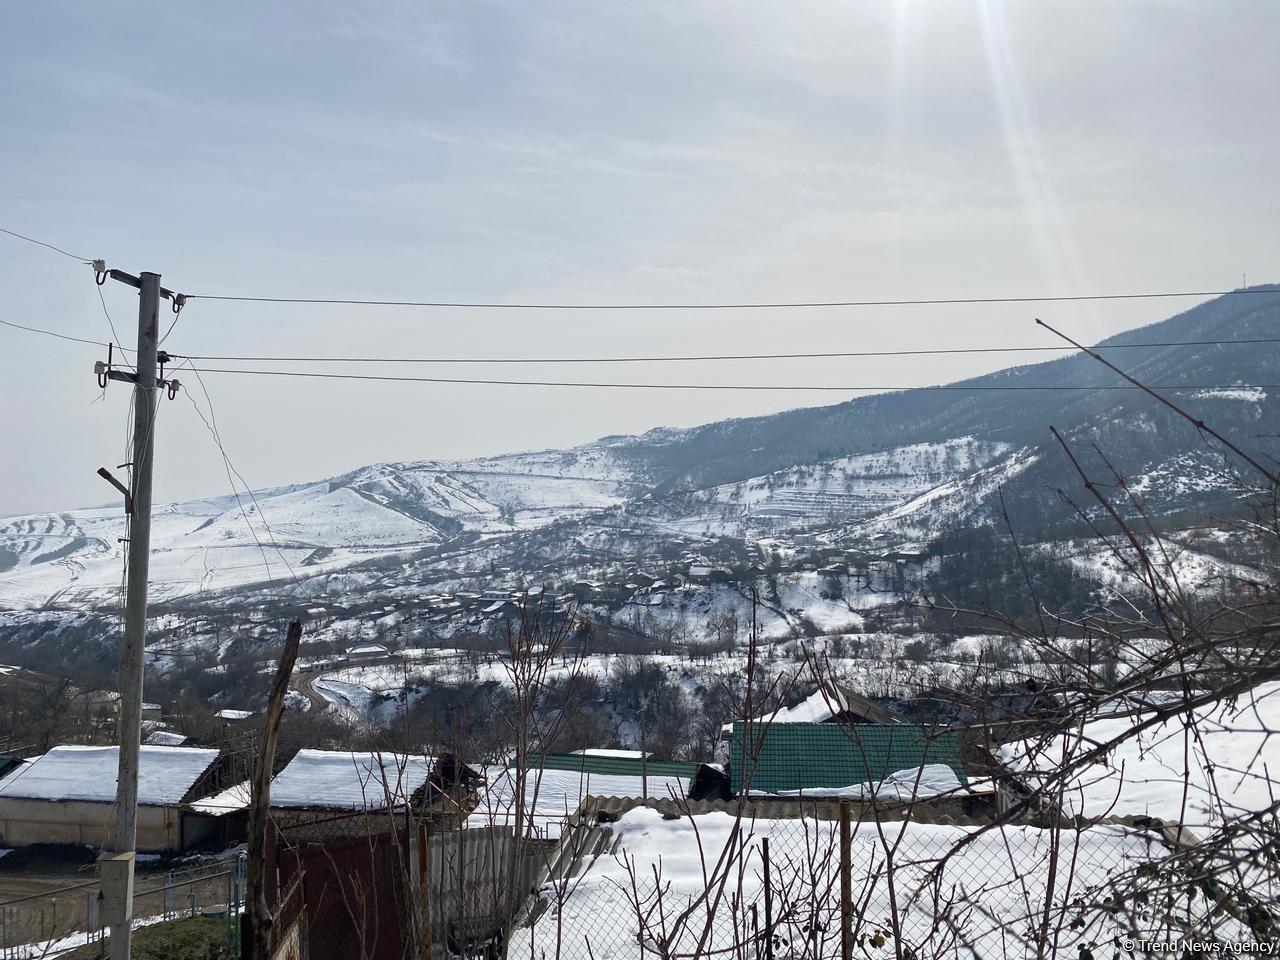 Trend TV reports from Edilli village of Khojavand district [PHOTO/VIDEO]